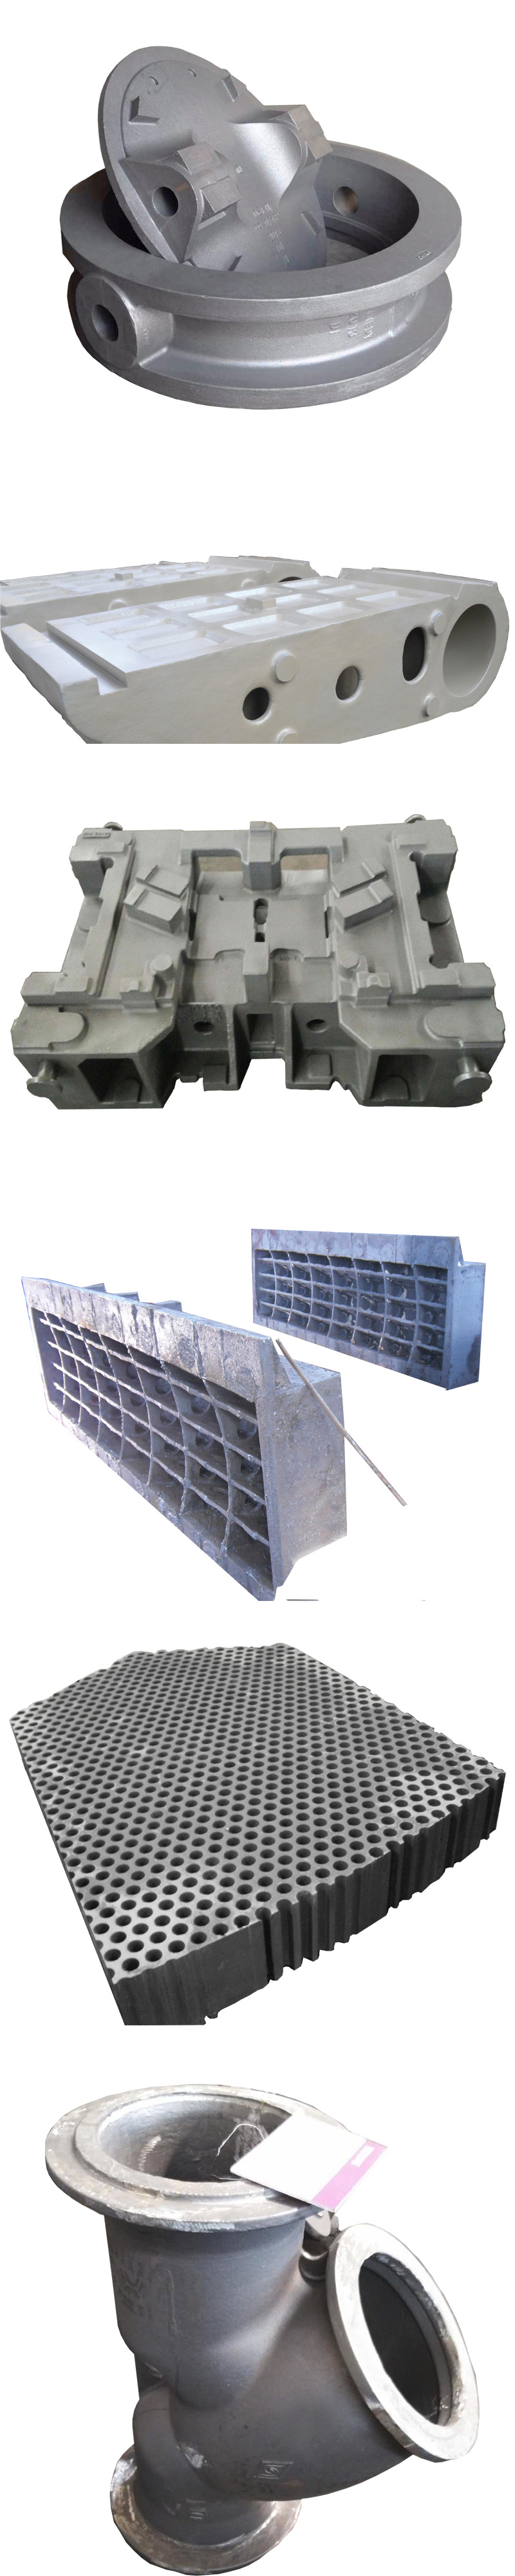 OEM Cast Foundry Mold Casting Super Heavy Duty Caster Cast Iron